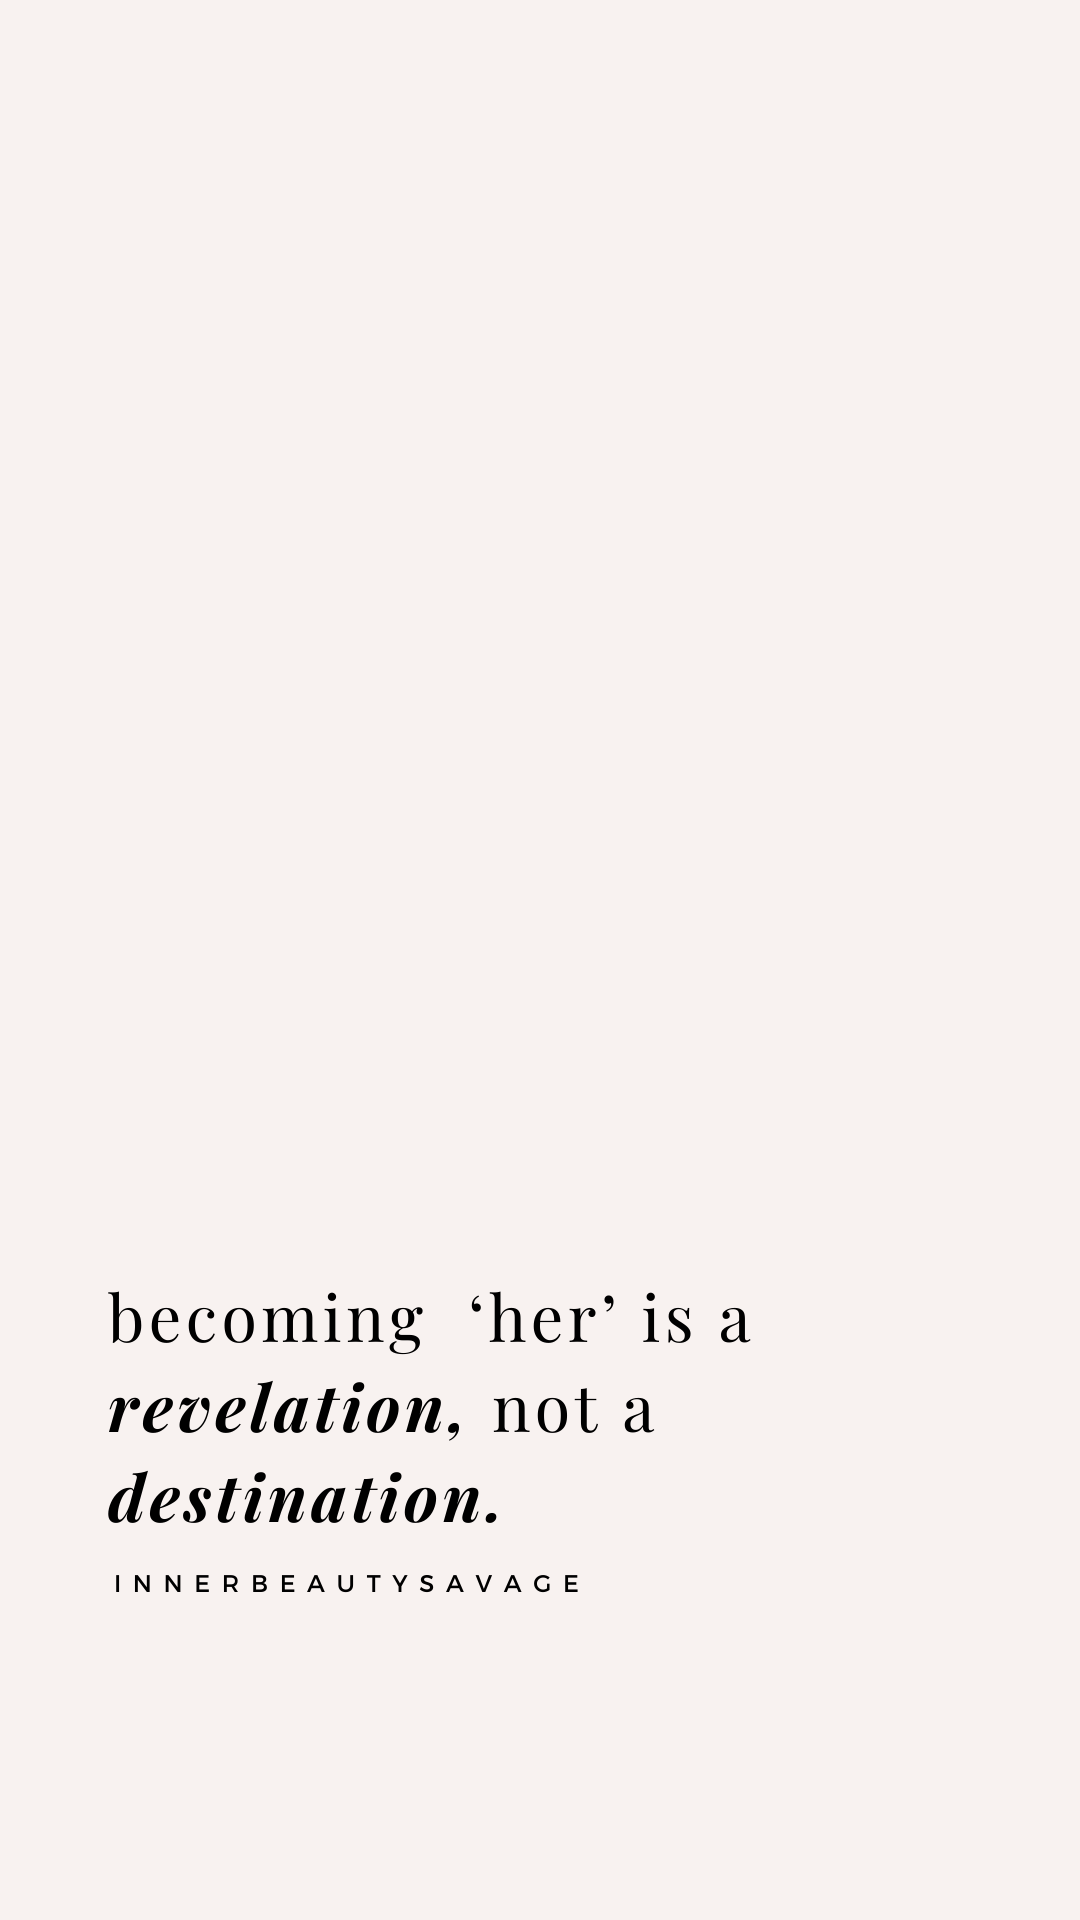 quote on becoming 'her'